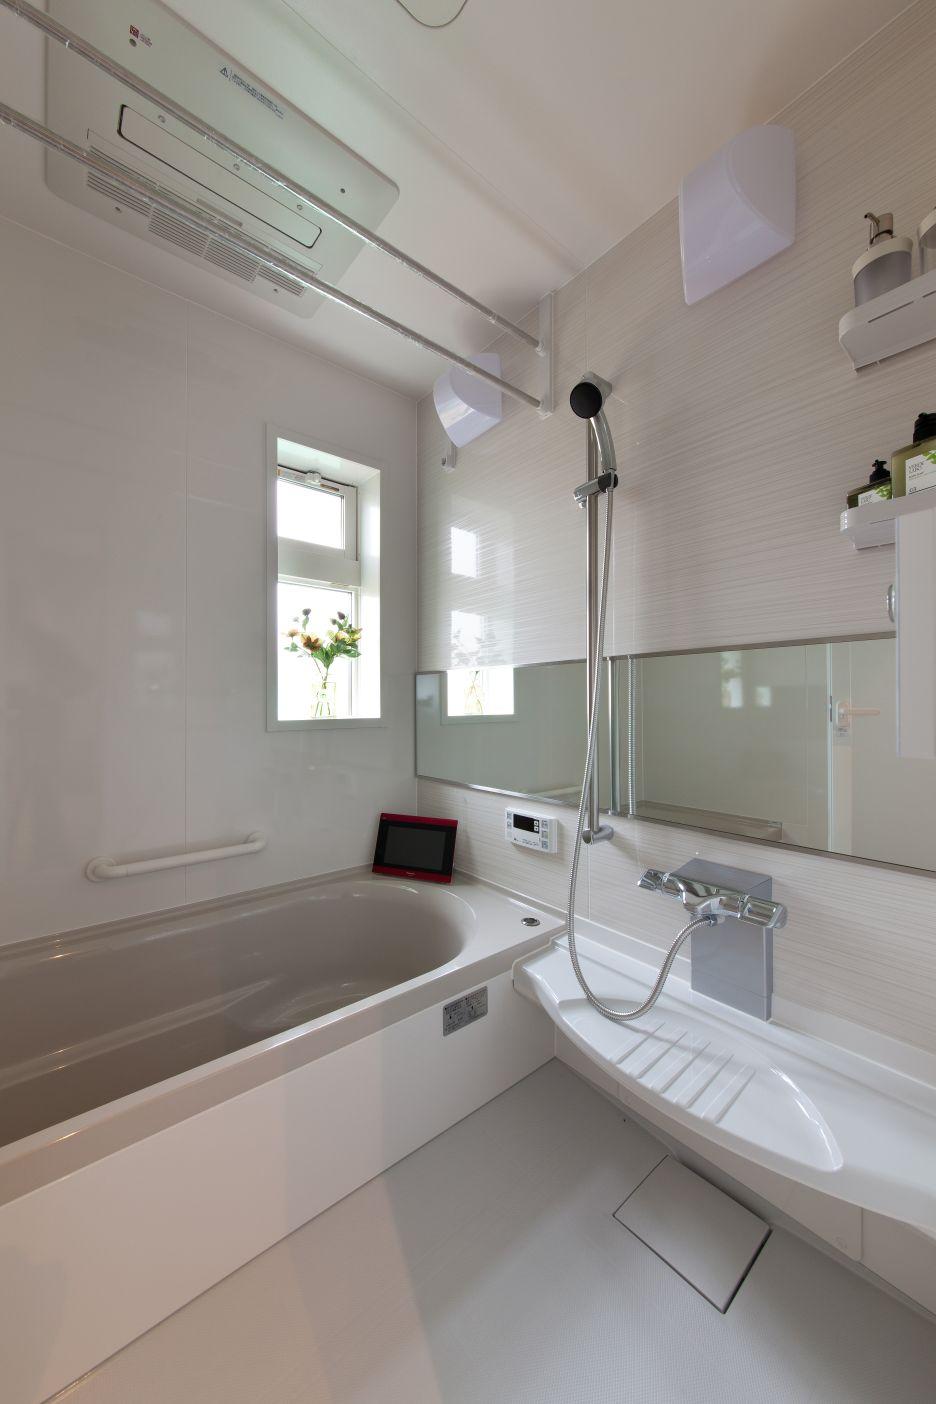 Bathroom. Tired of the day will heal in the spacious bathroom. Standard equipment, such as easy to clean.